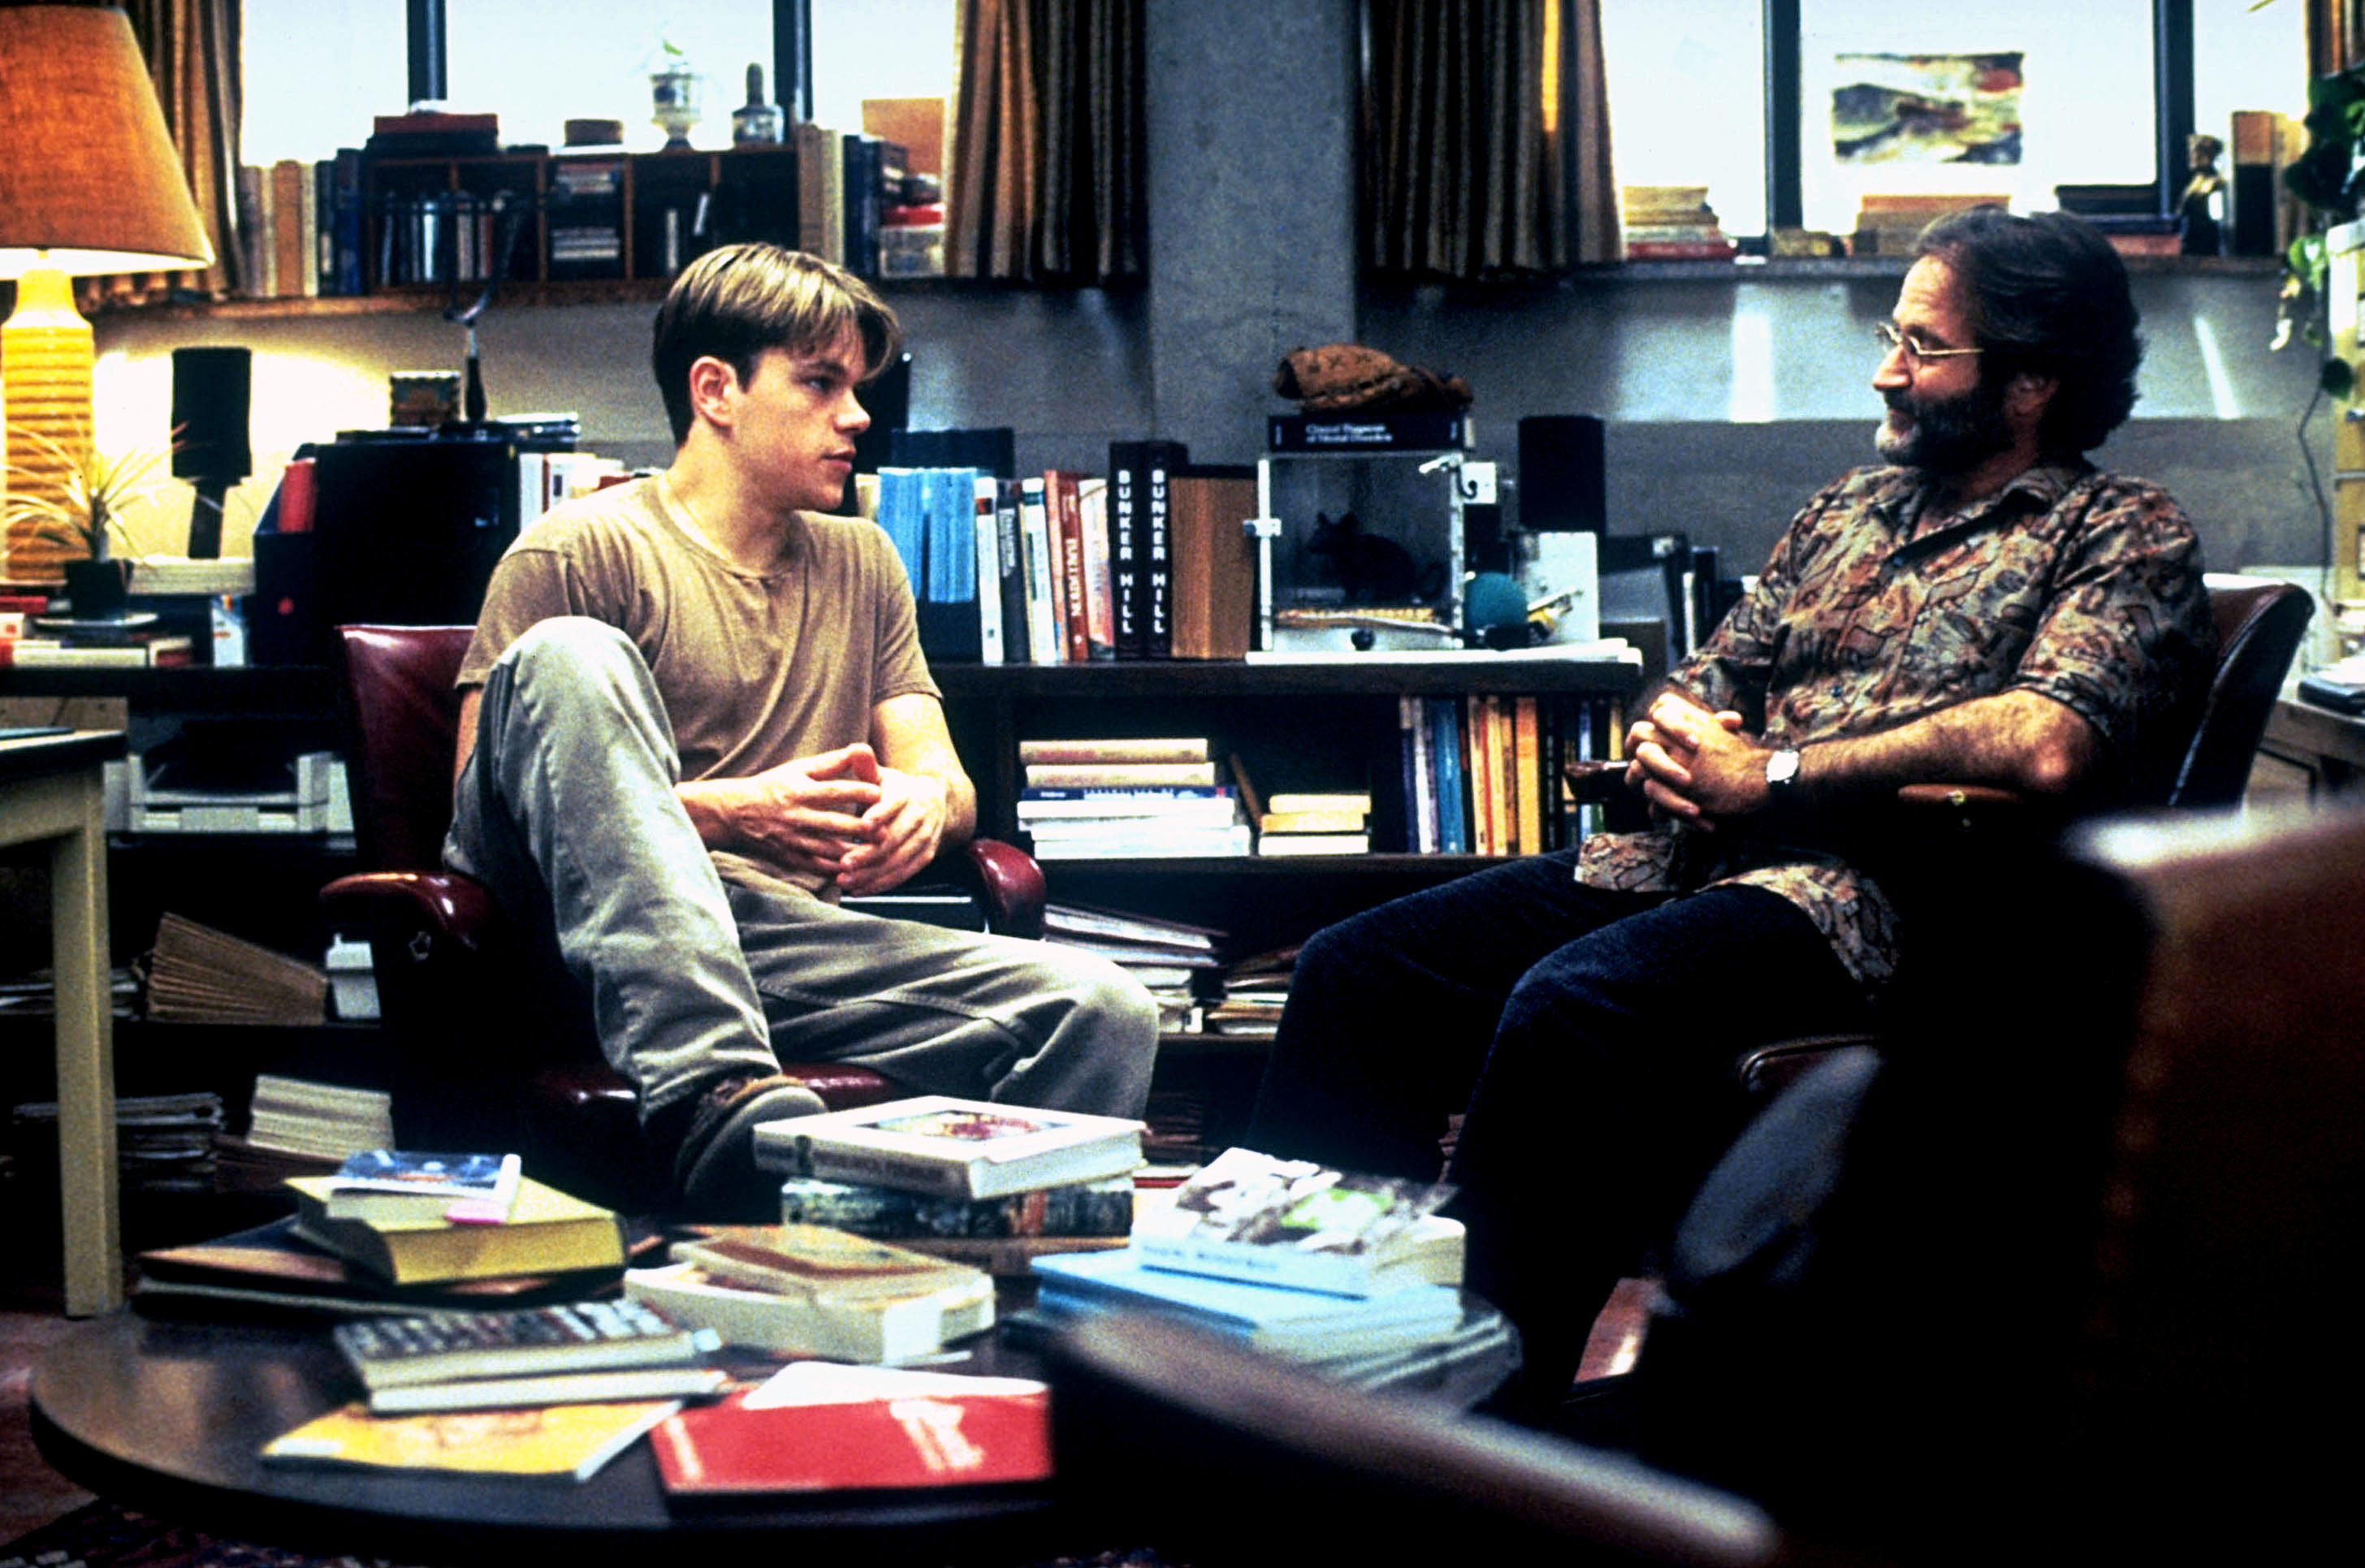 Matt Damon and Robin Williams sit in a cozy, book-filled office, engaged in conversation